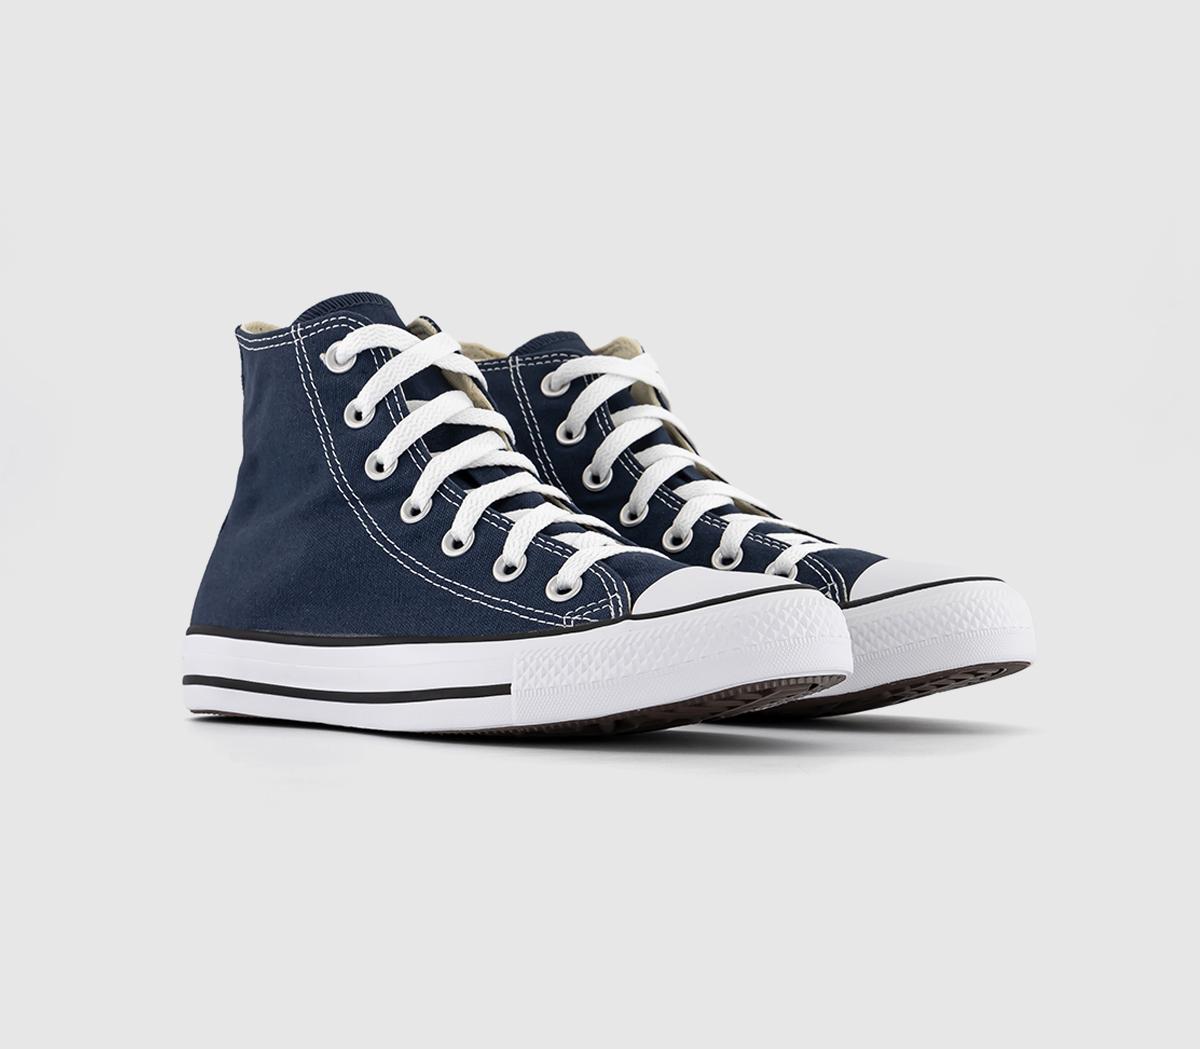 Mens Converse All Star Hi Canvas Trainers In Navy Blue And White, 11